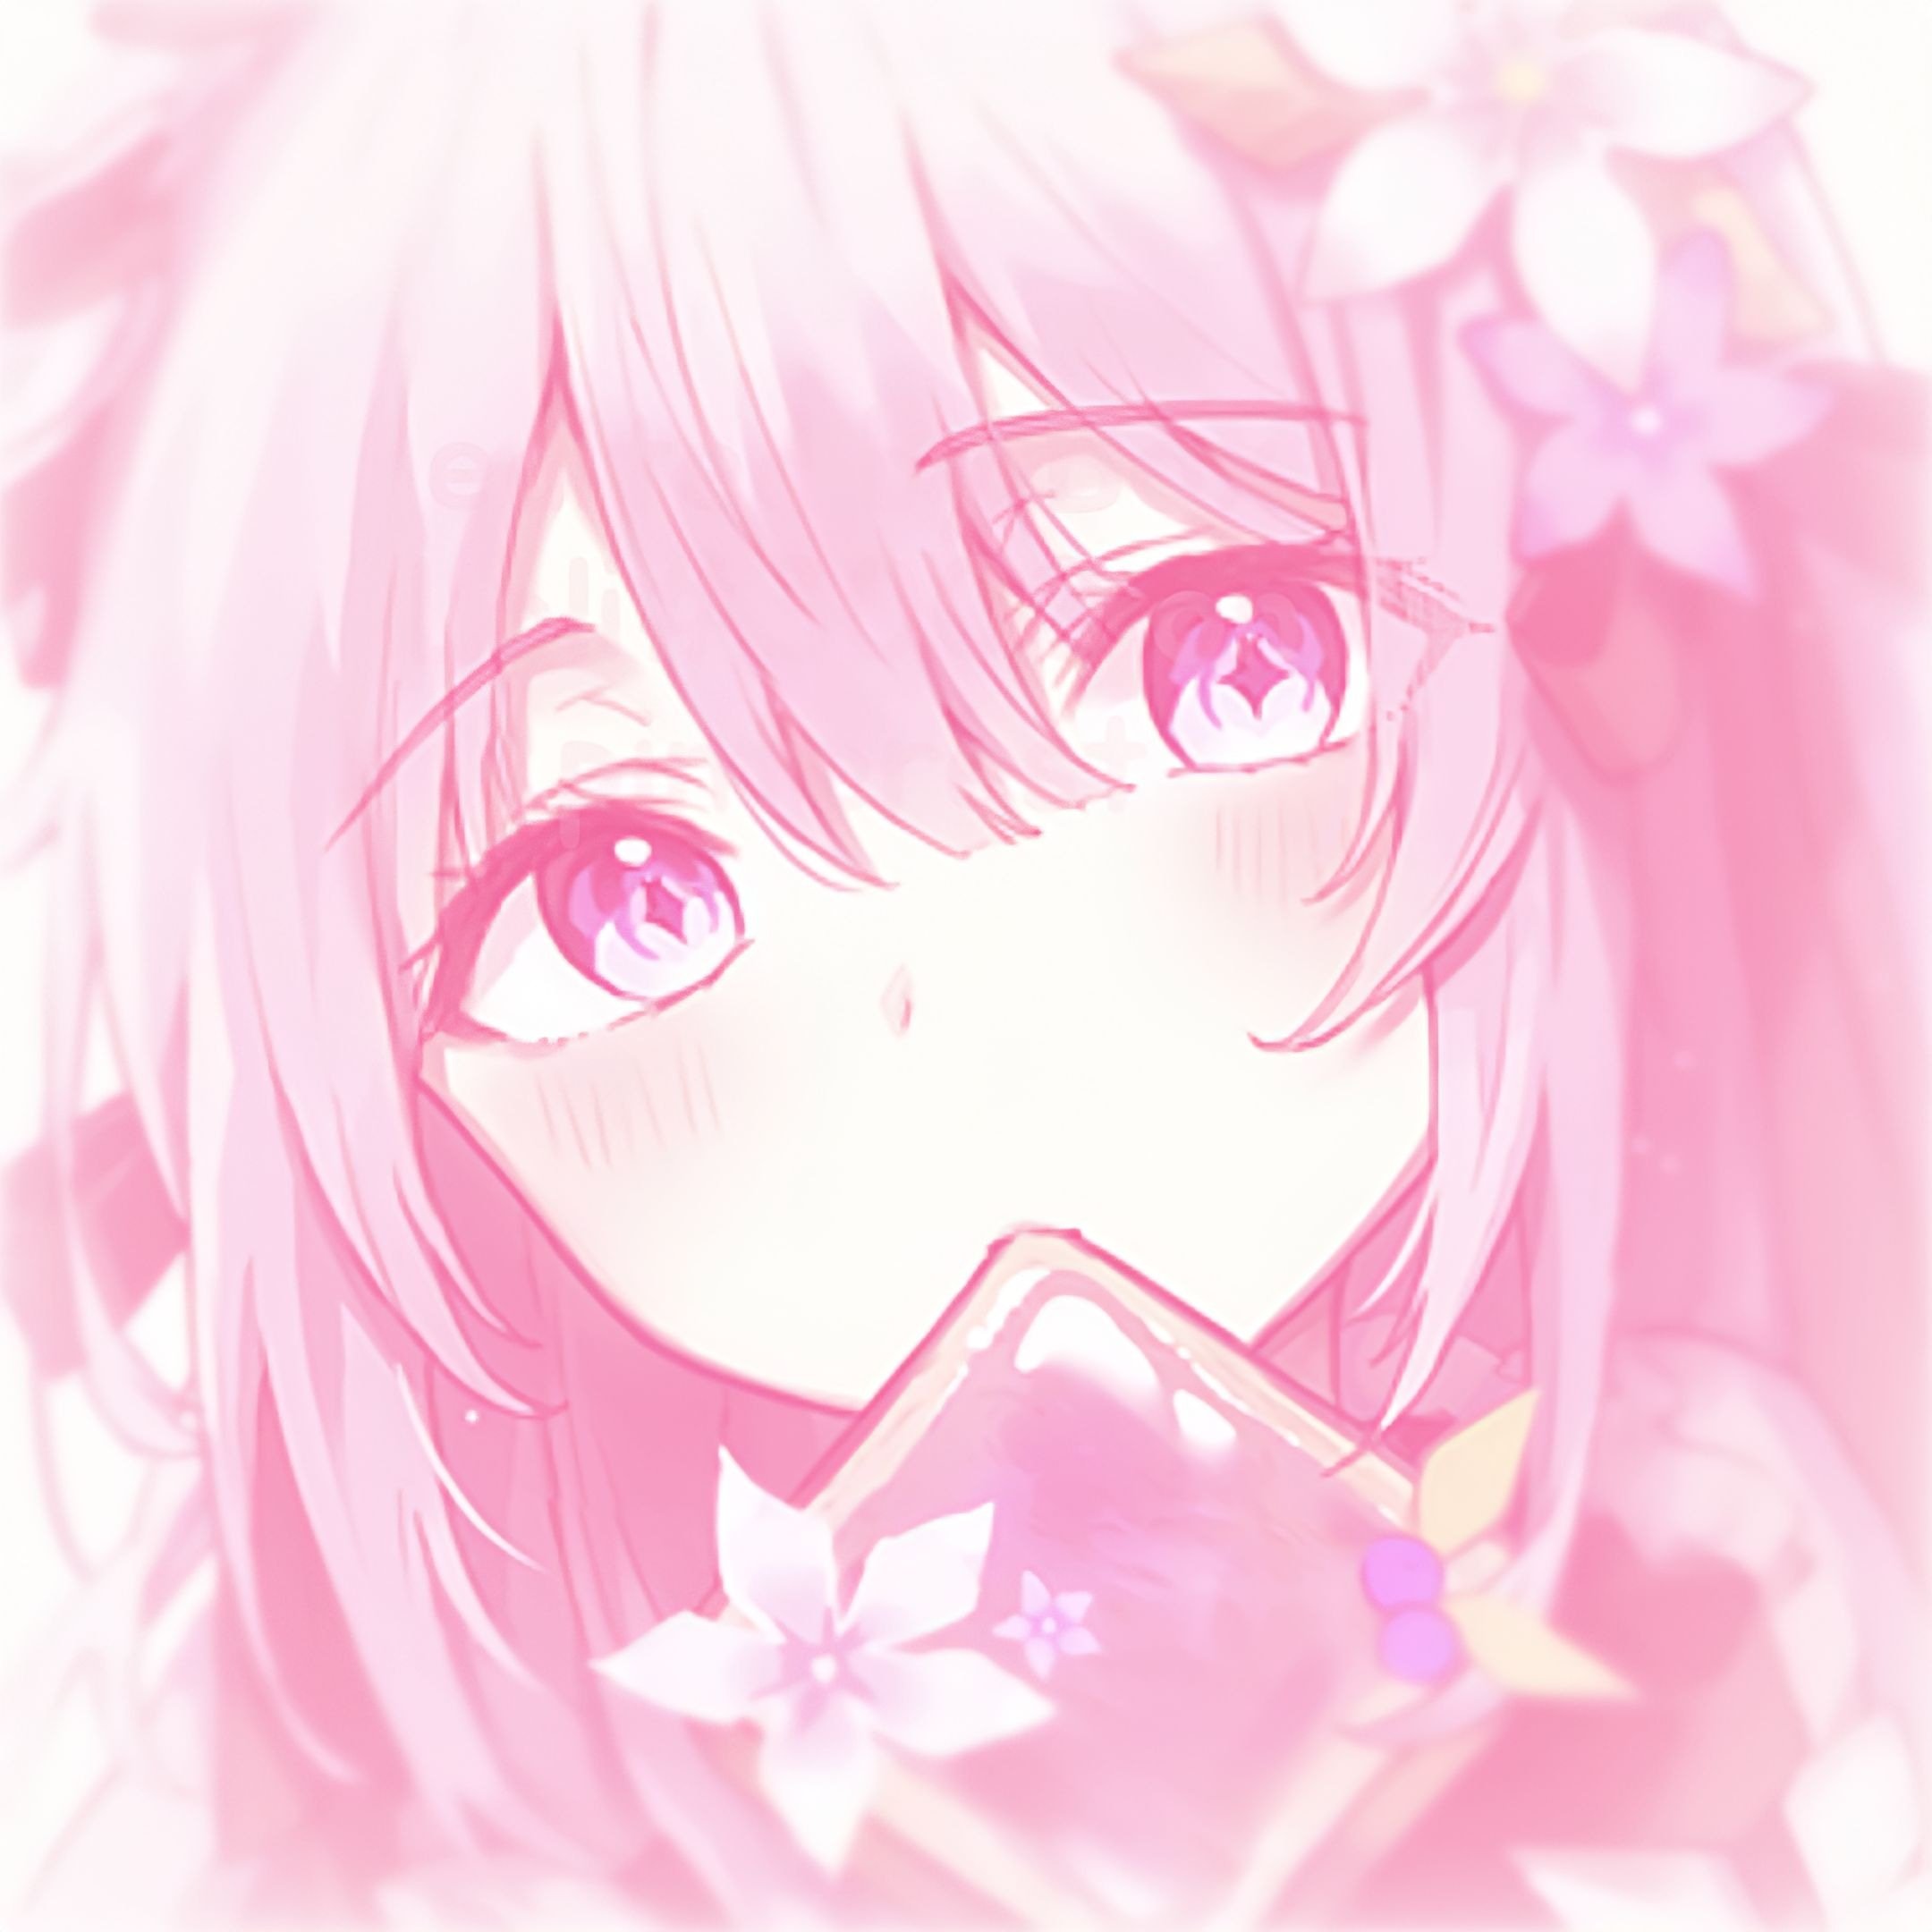 Aesthetic, anime, kawaii and cute discord server within 28 hours